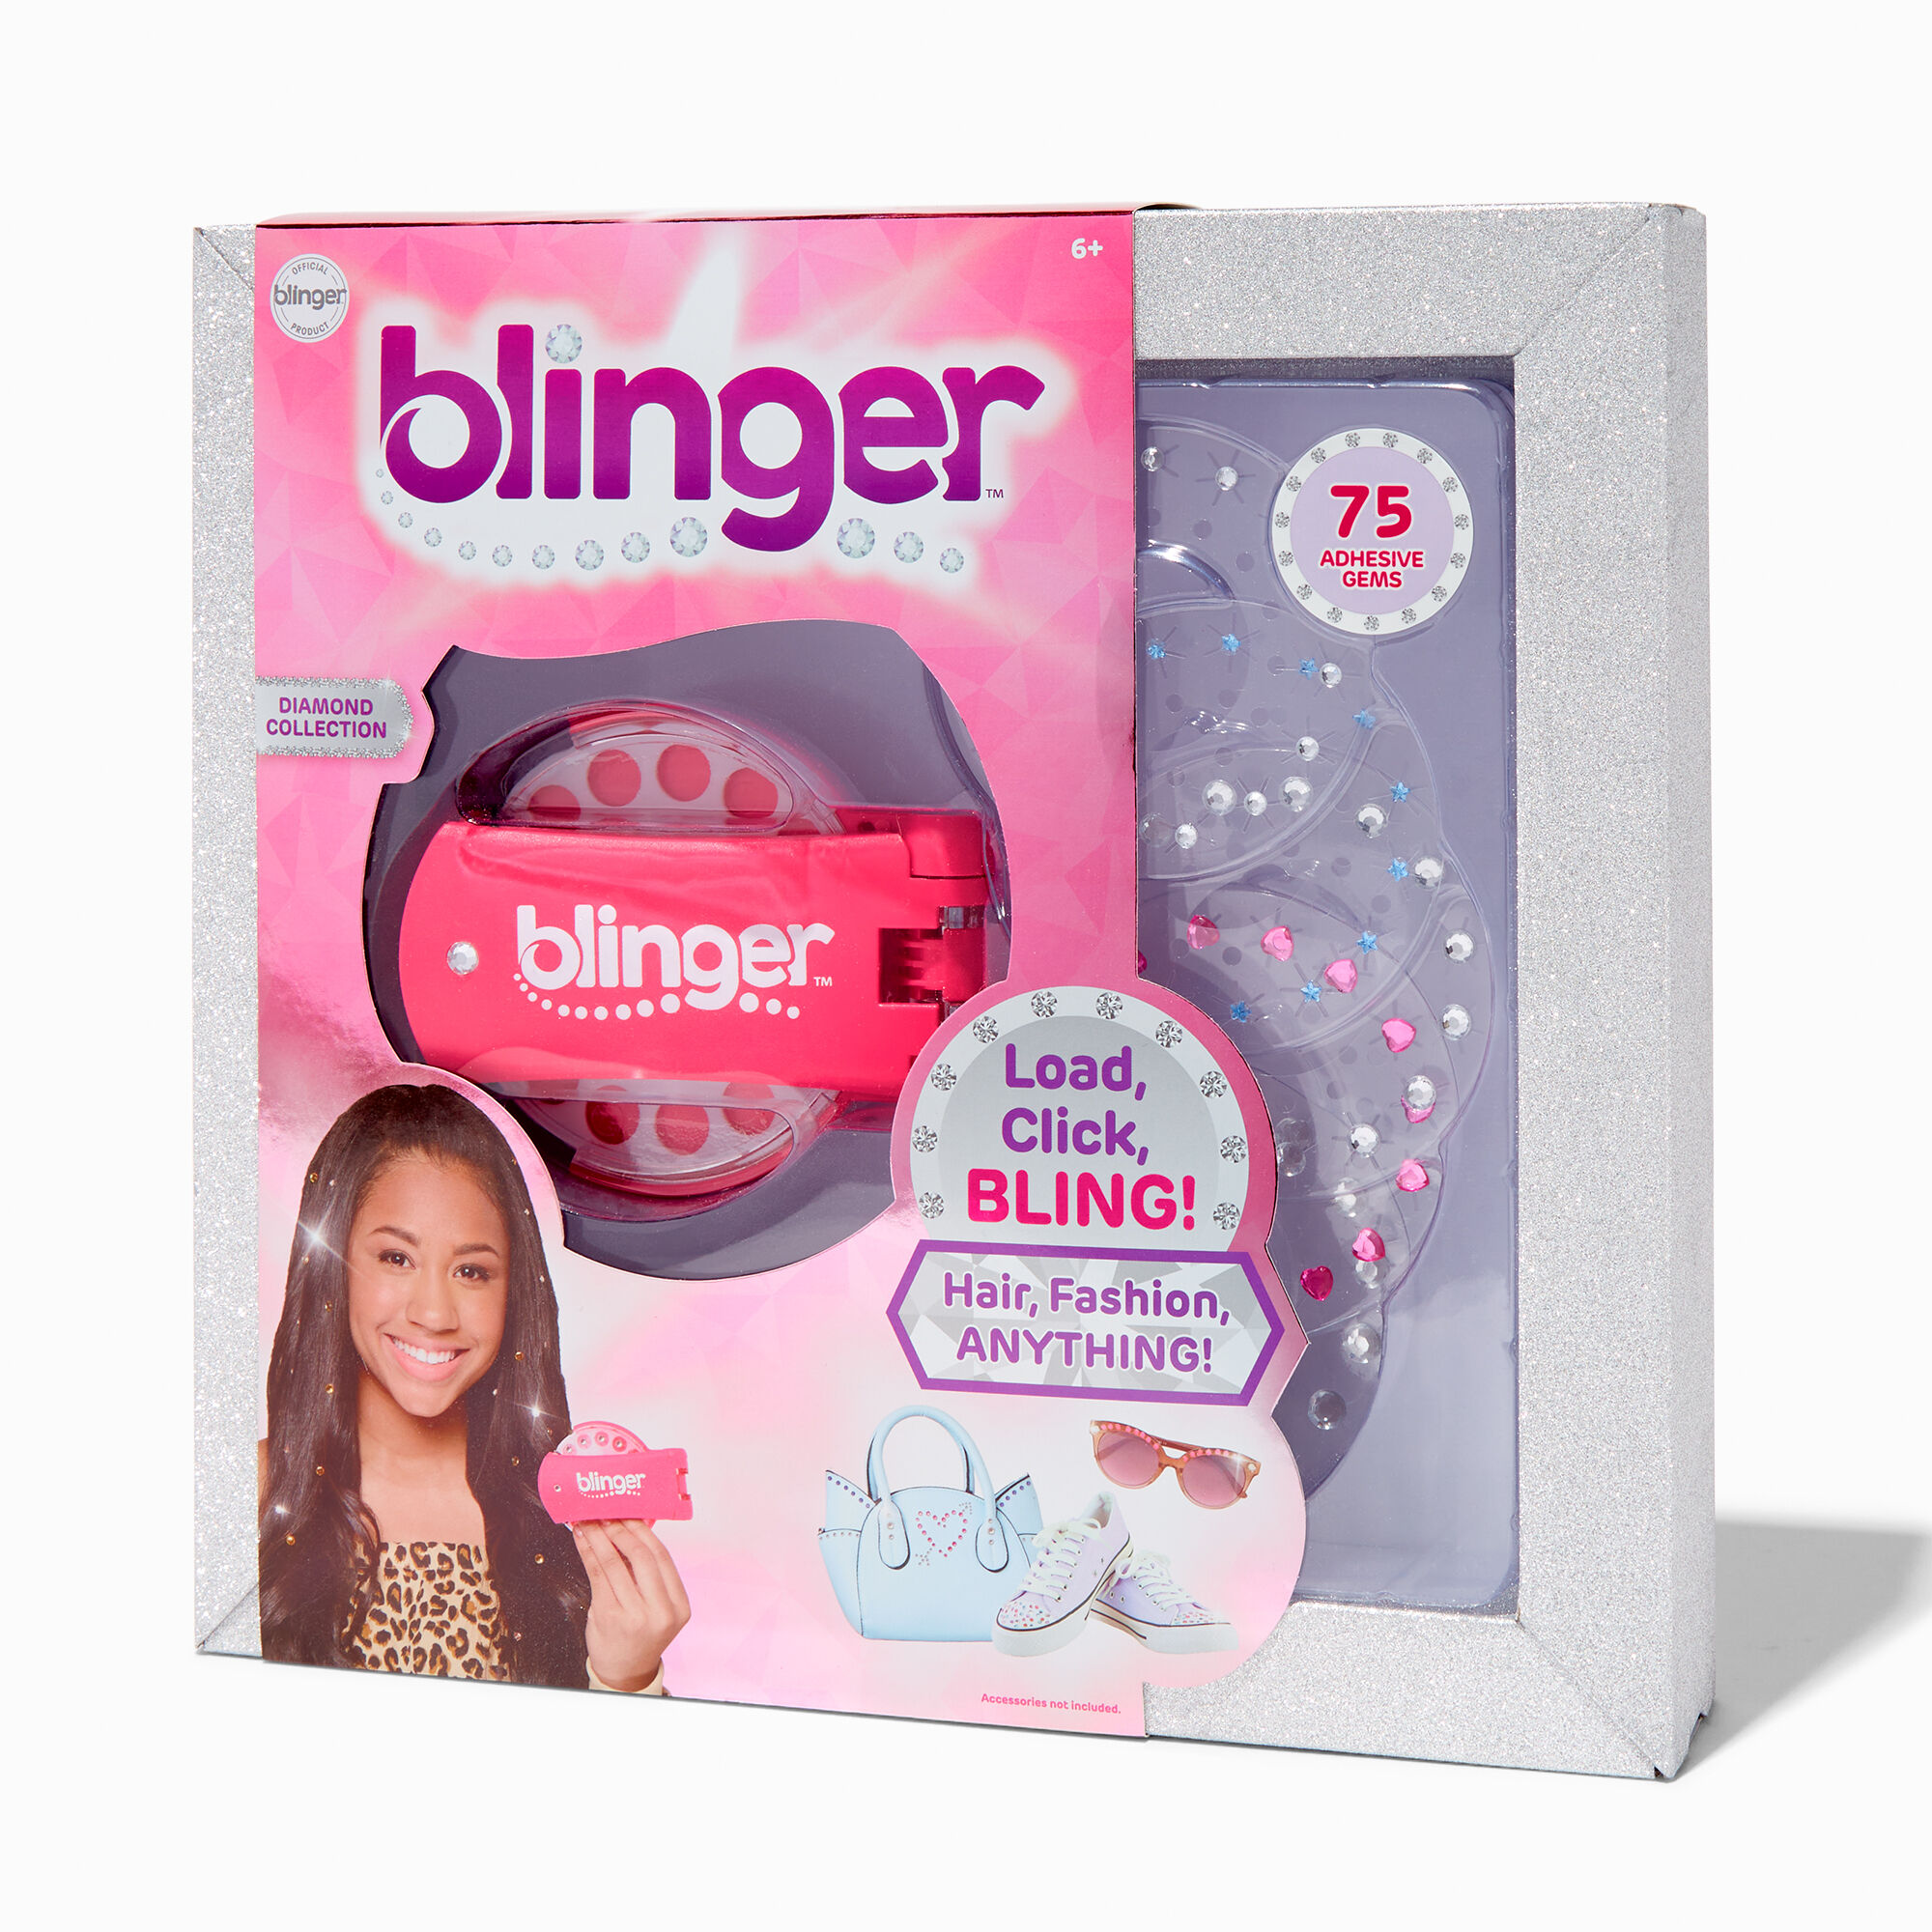 Blinger Diamond Collection Hair & Fashion Tool Kit | Claire's US